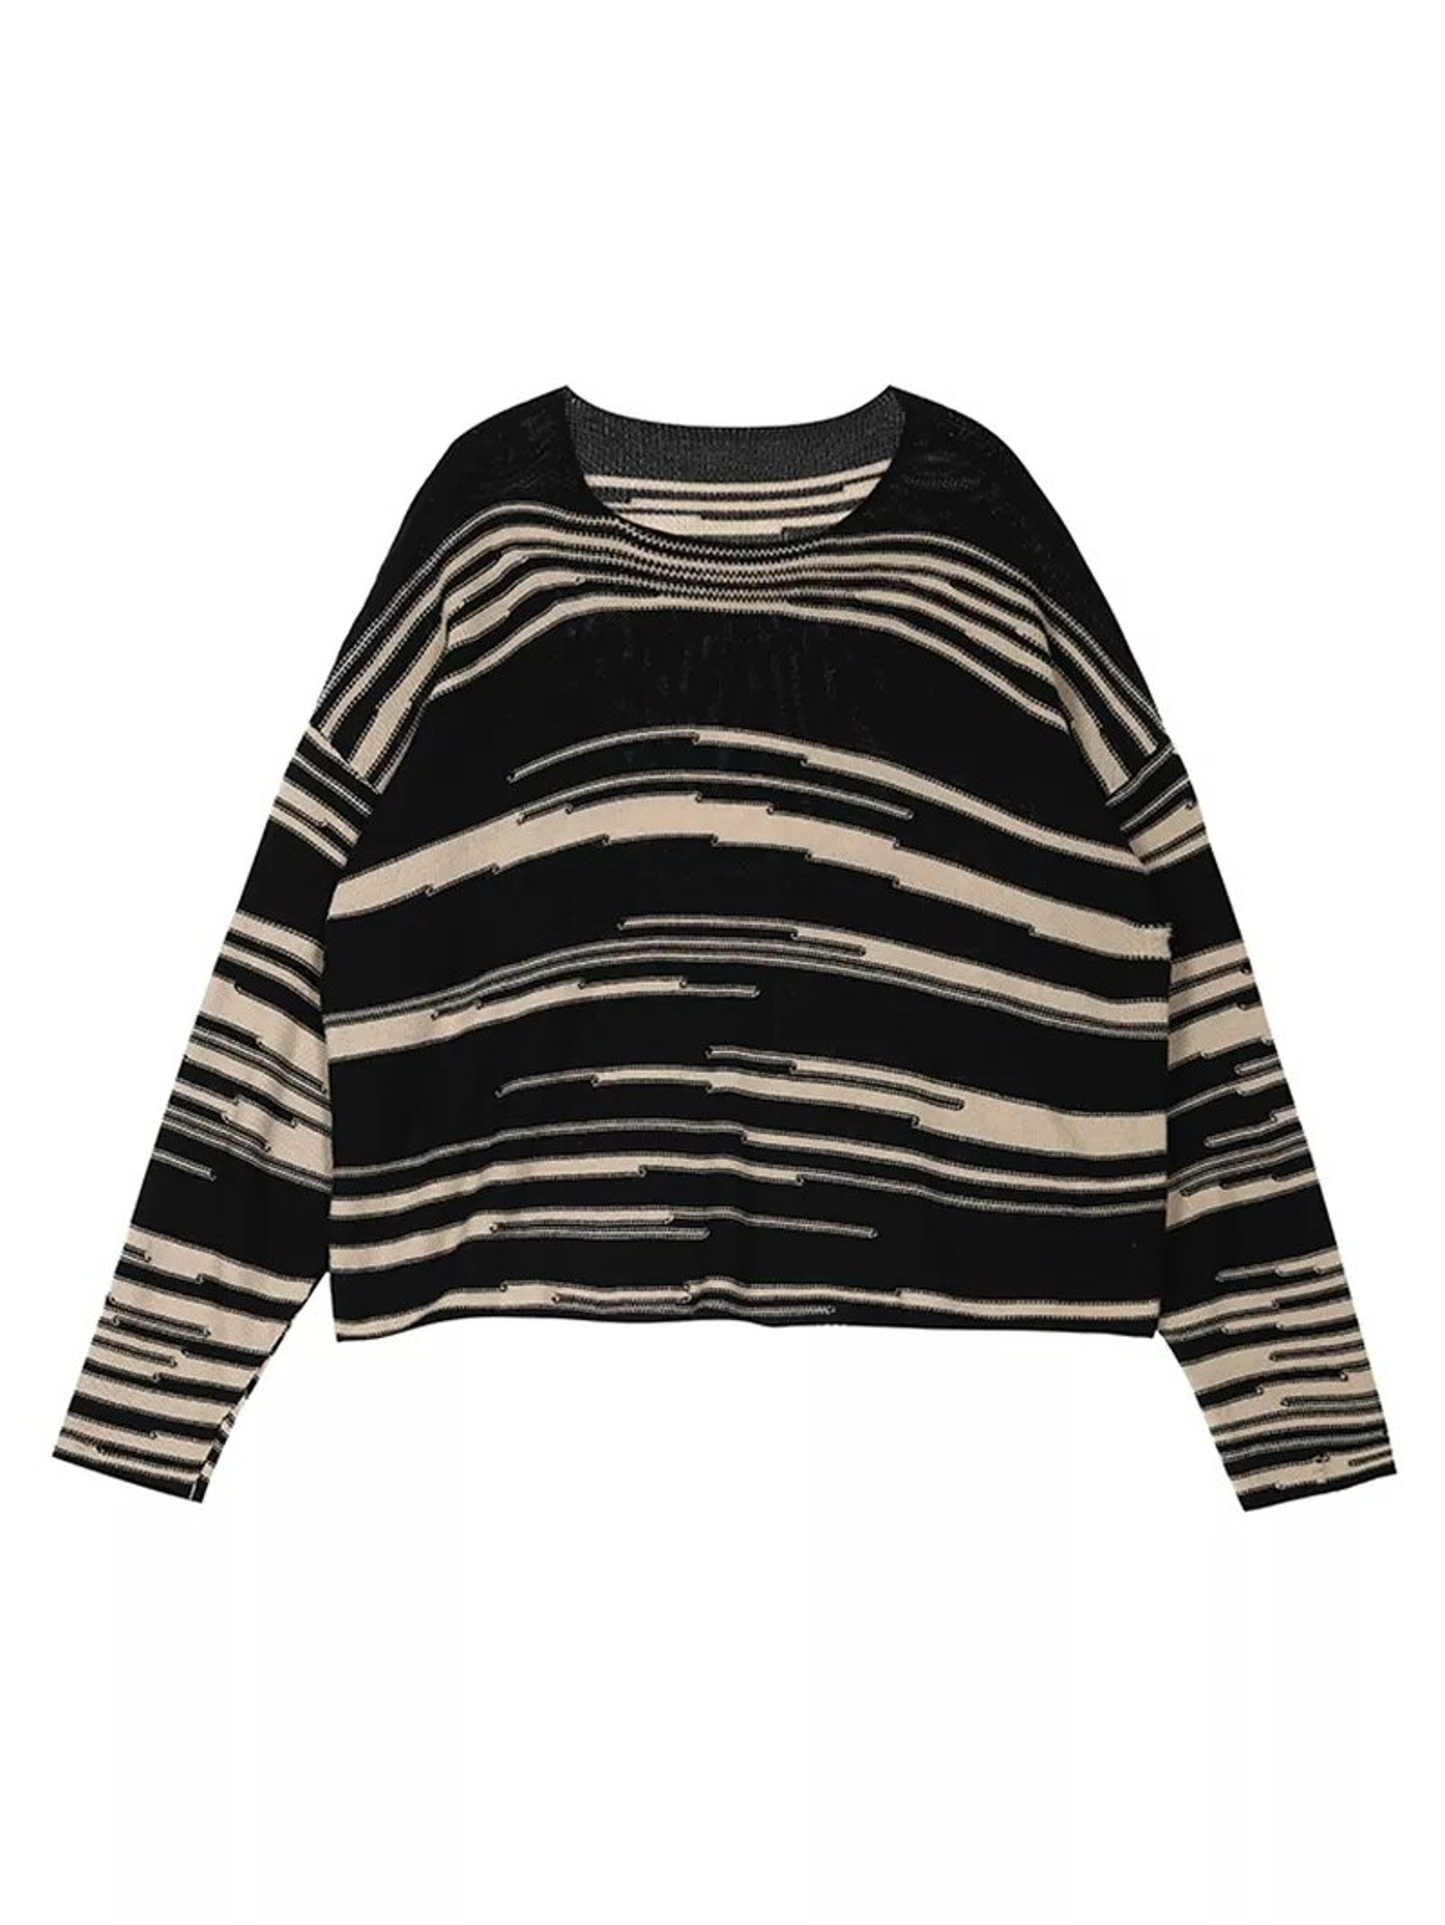 Gothic Style Vintage Knitted Striped Sweater